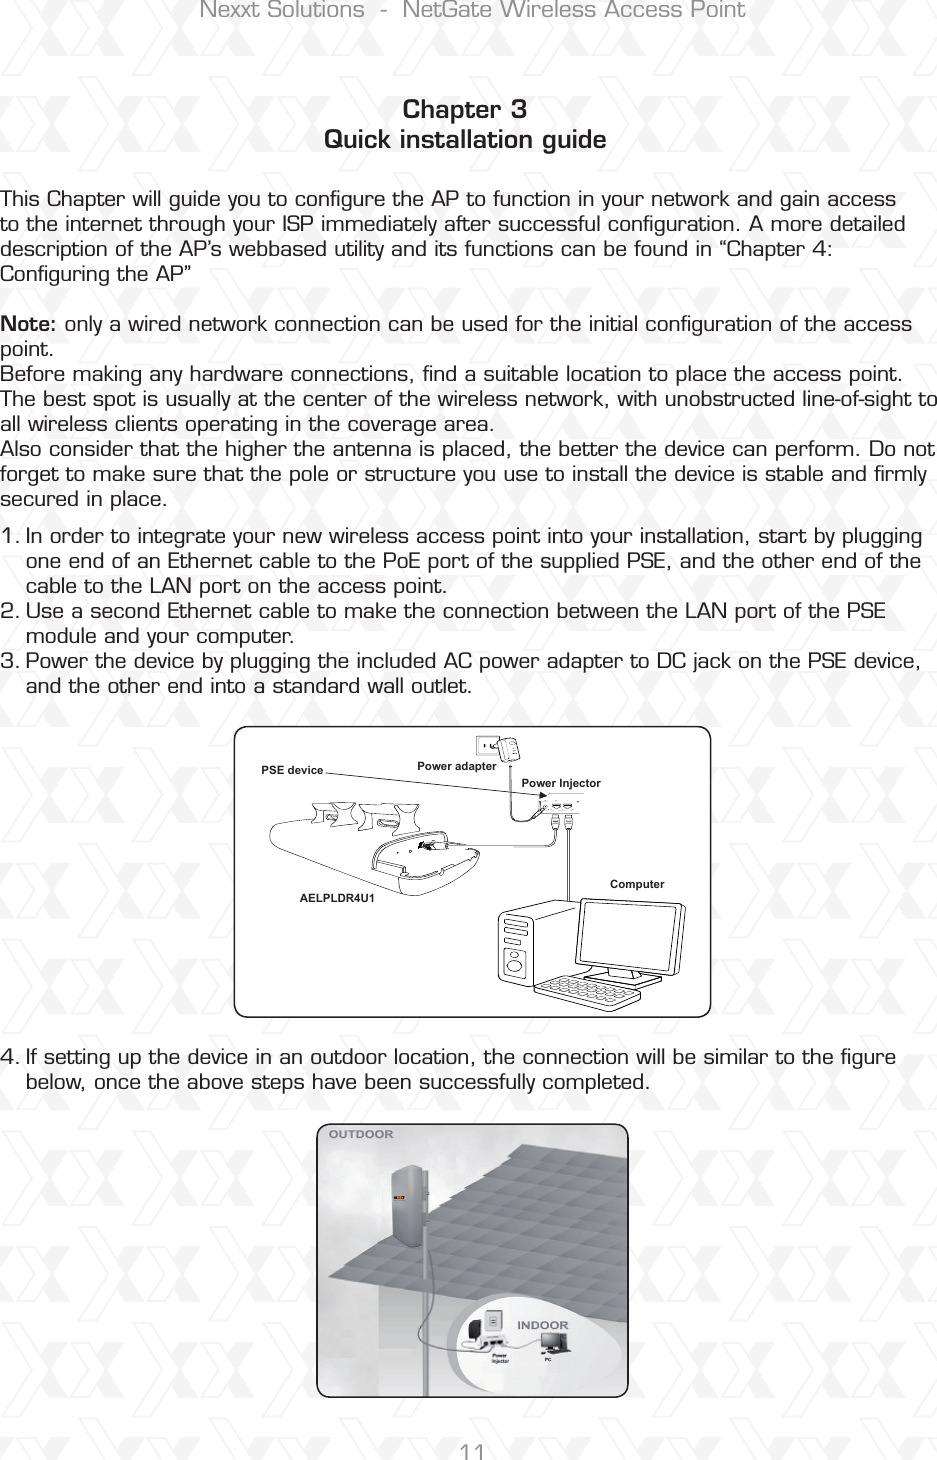 Nexxt Solutions  -  NetGate Wireless Access Point11In order to integrate your new wireless access point into your installation, start by plugging one end of an Ethernet cable to the PoE port of the supplied PSE, and the other end of the cable to the LAN port on the access point.Use a second Ethernet cable to make the connection between the LAN port of the PSE module and your computer.Power the device by plugging the included AC power adapter to DC jack on the PSE device, and the other end into a standard wall outlet.If setting up the device in an outdoor location, the connection will be similar to the ﬁgure below, once the above steps have been successfully completed.1.2.3.4.Chapter 3Quick installation guideThis Chapter will guide you to conﬁgure the AP to function in your network and gain accessto the internet through your ISP immediately after successful conﬁguration. A more detailed description of the AP’s webbased utility and its functions can be found in “Chapter 4: Conﬁguring the AP”Note: only a wired network connection can be used for the initial conﬁguration of the accesspoint.Before making any hardware connections, ﬁnd a suitable location to place the access point. The best spot is usually at the center of the wireless network, with unobstructed line-of-sight to all wireless clients operating in the coverage area.Also consider that the higher the antenna is placed, the better the device can perform. Do notforget to make sure that the pole or structure you use to install the device is stable and ﬁrmlysecured in place.Power adapterPower InjectorComputerAELPLDR4U1PSE device